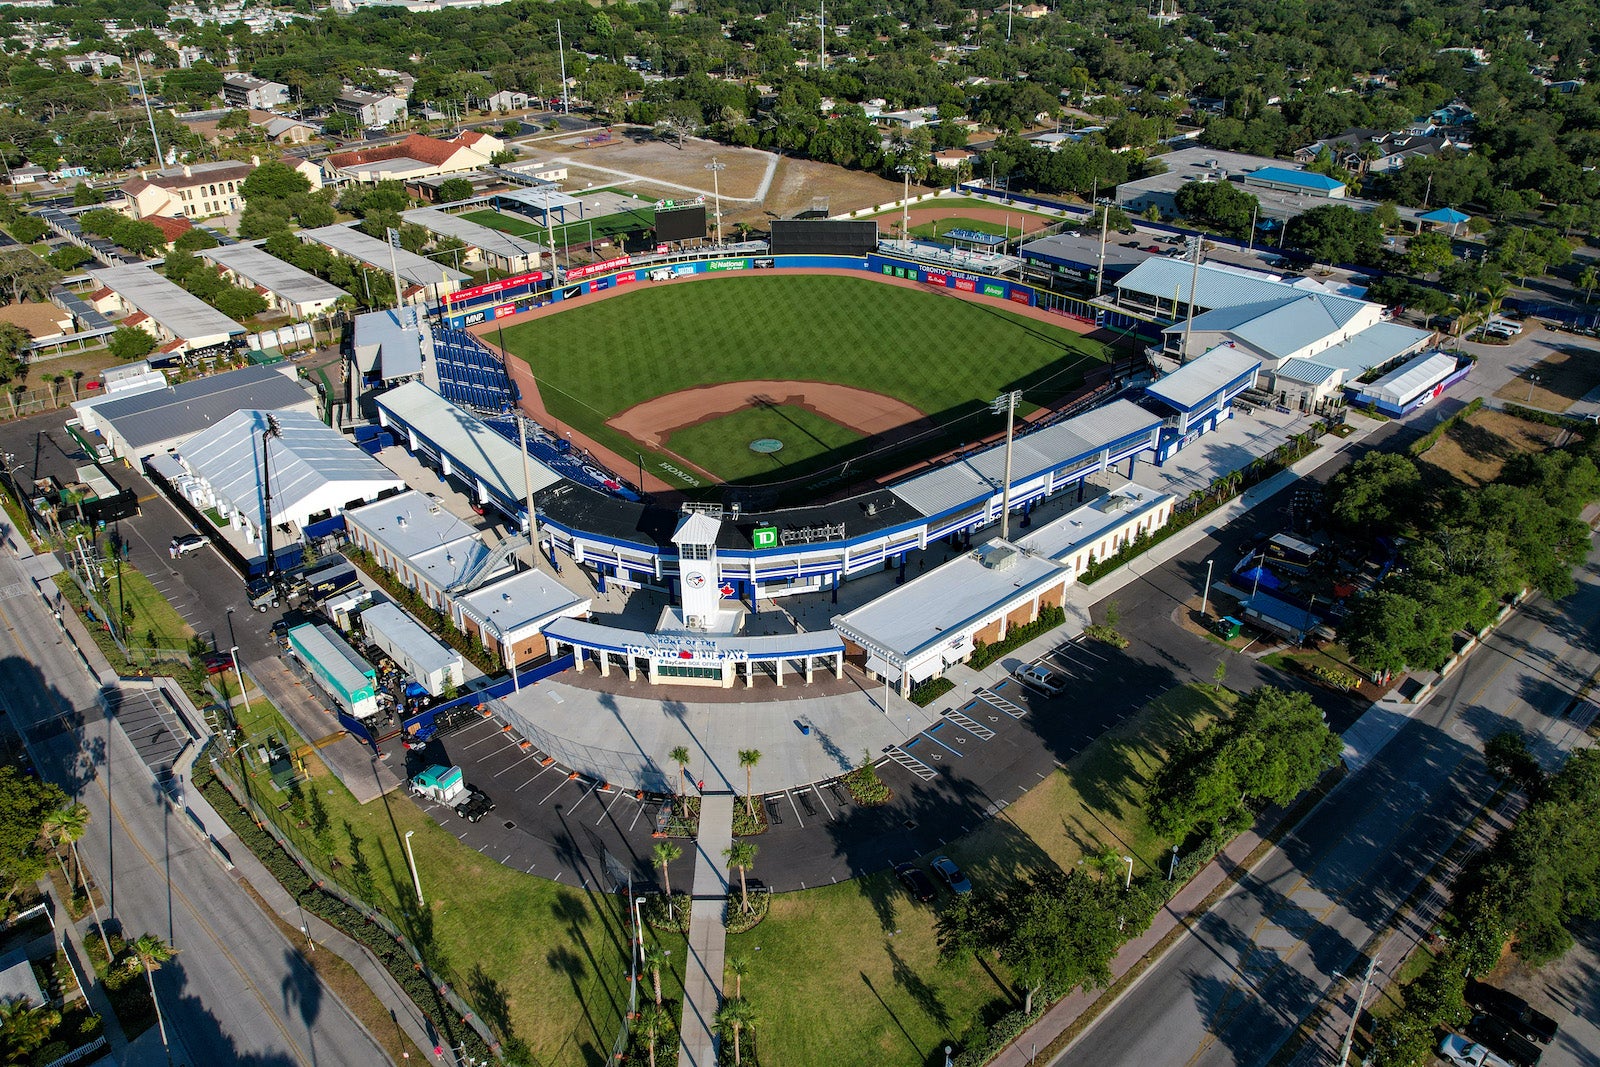 Dunedin Blue Jays - For the health and safety of Blue Jays fans, staff, and  players, the club has closed TD Ballpark, including the Jays Shop and  BayCare Box Office, to non-Blue